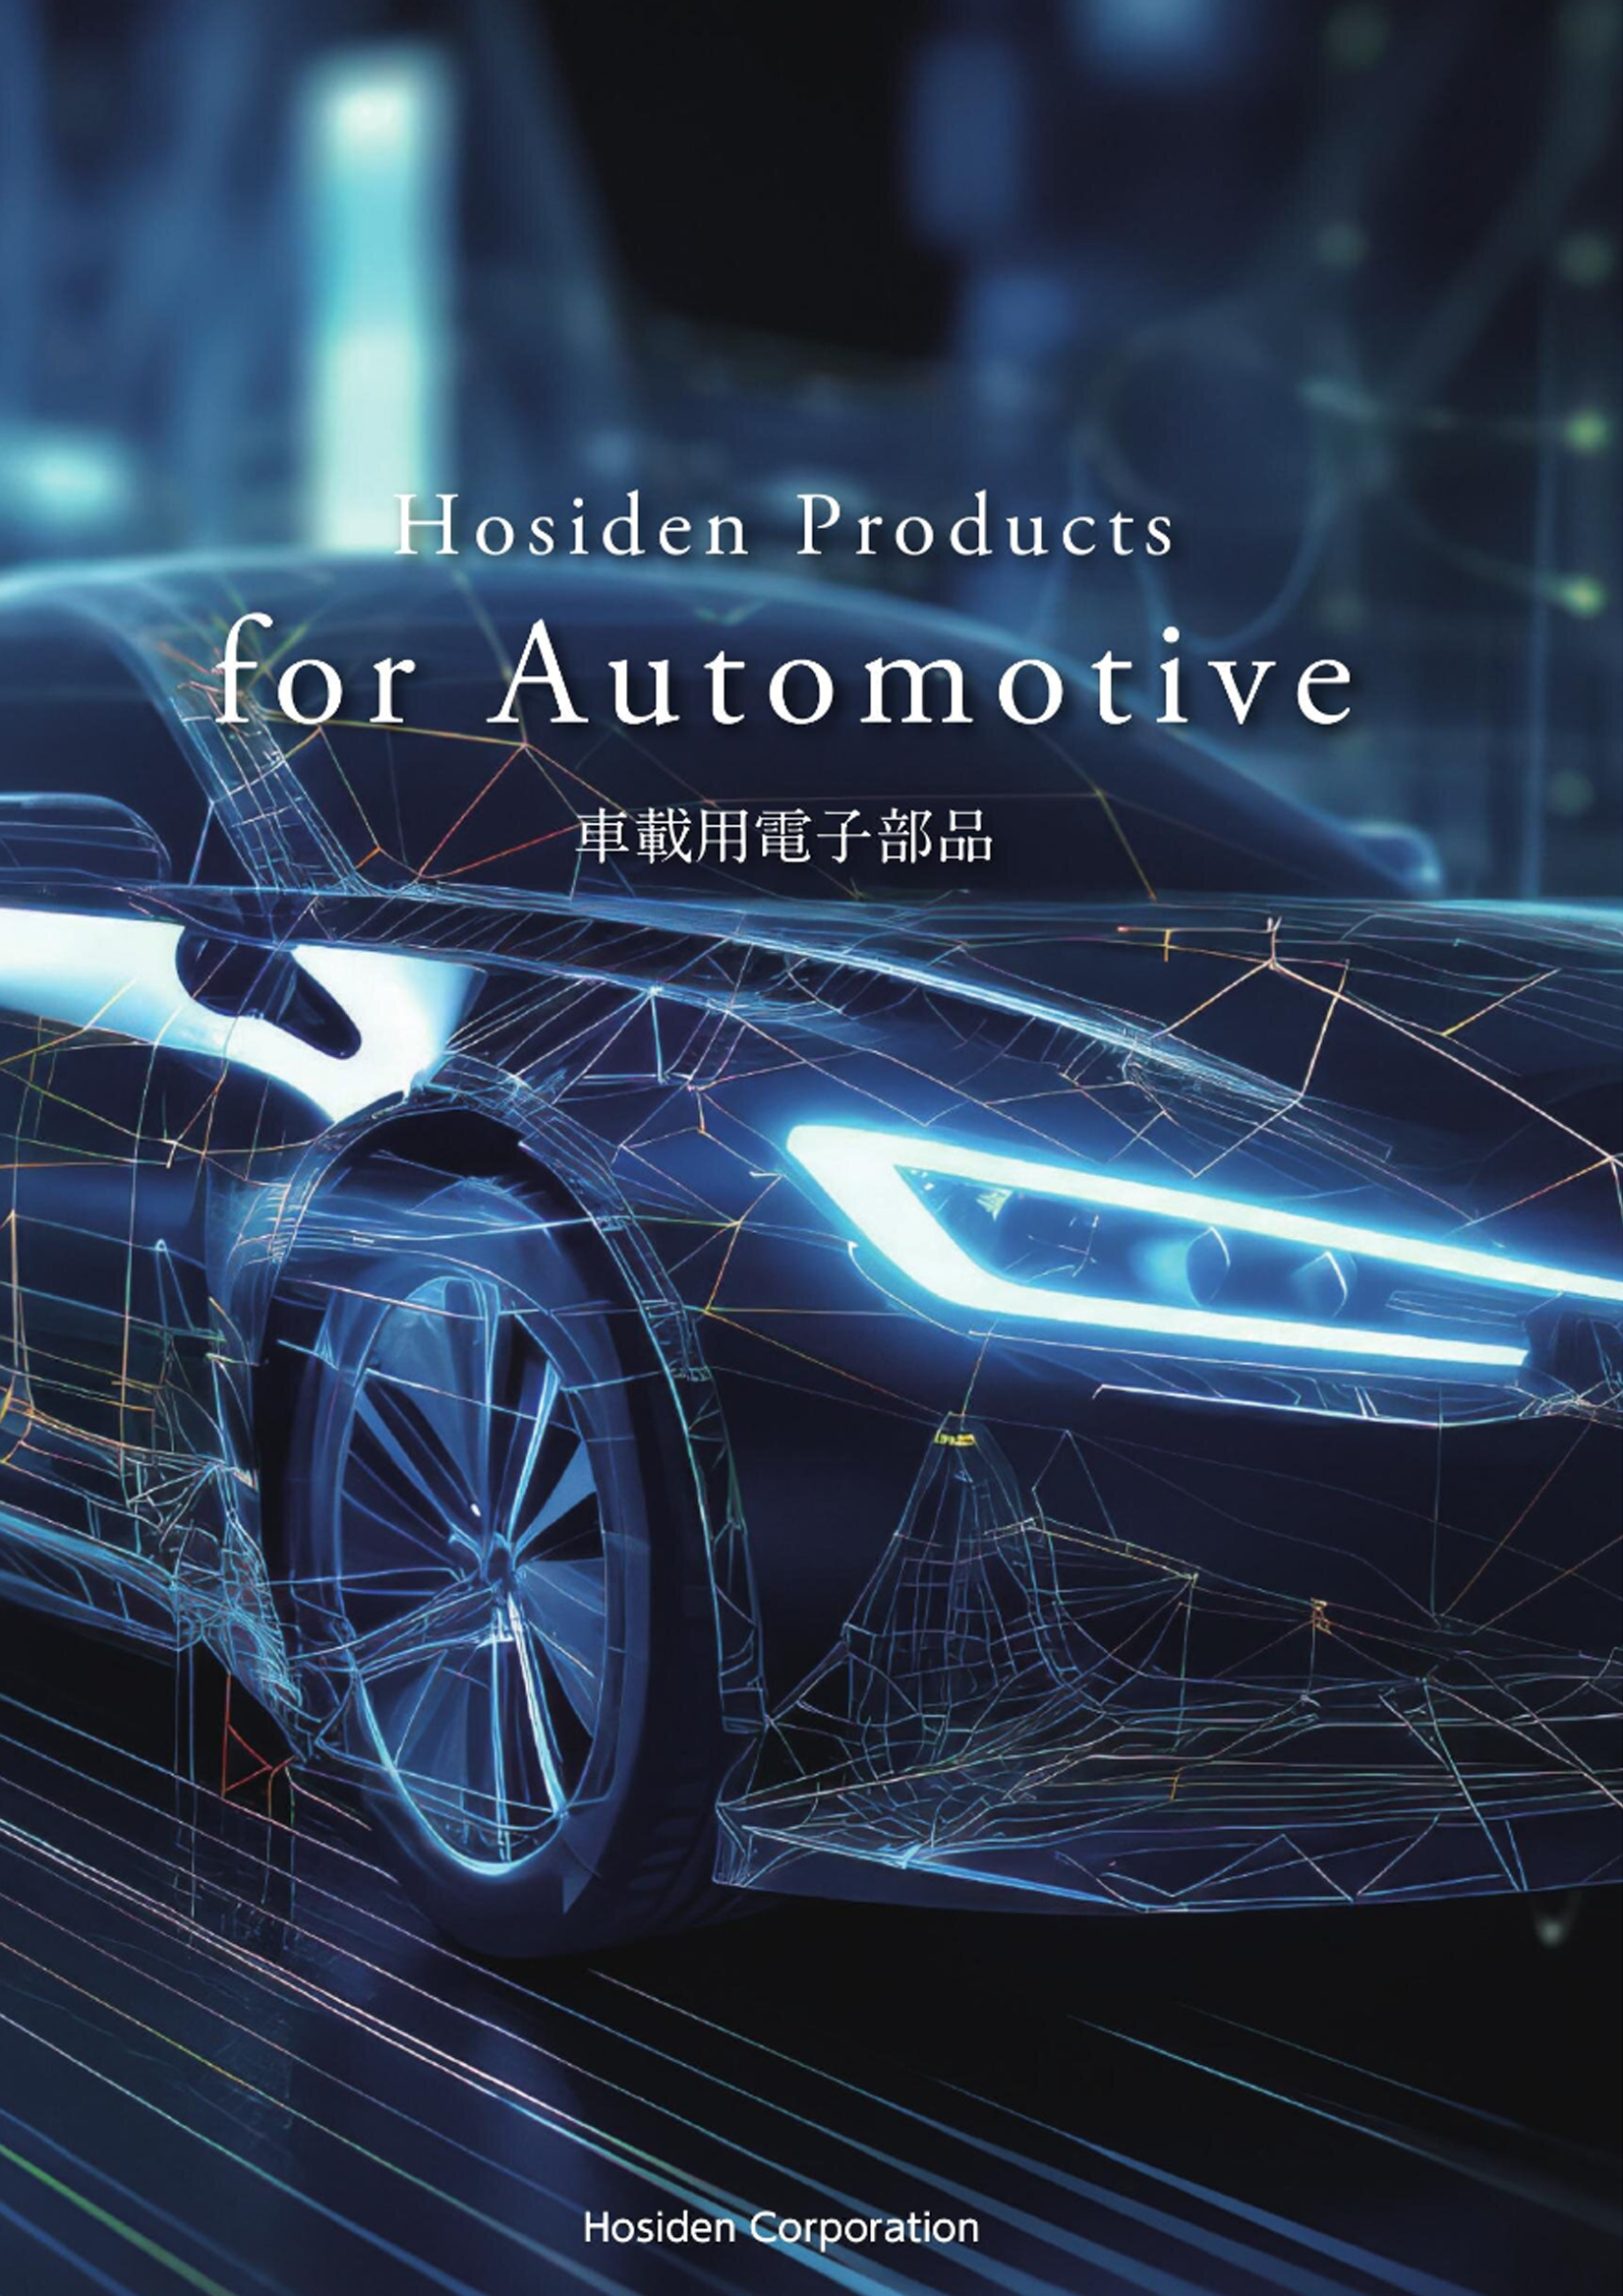 「Hosiden Products for Automotive　車載用電子部品」